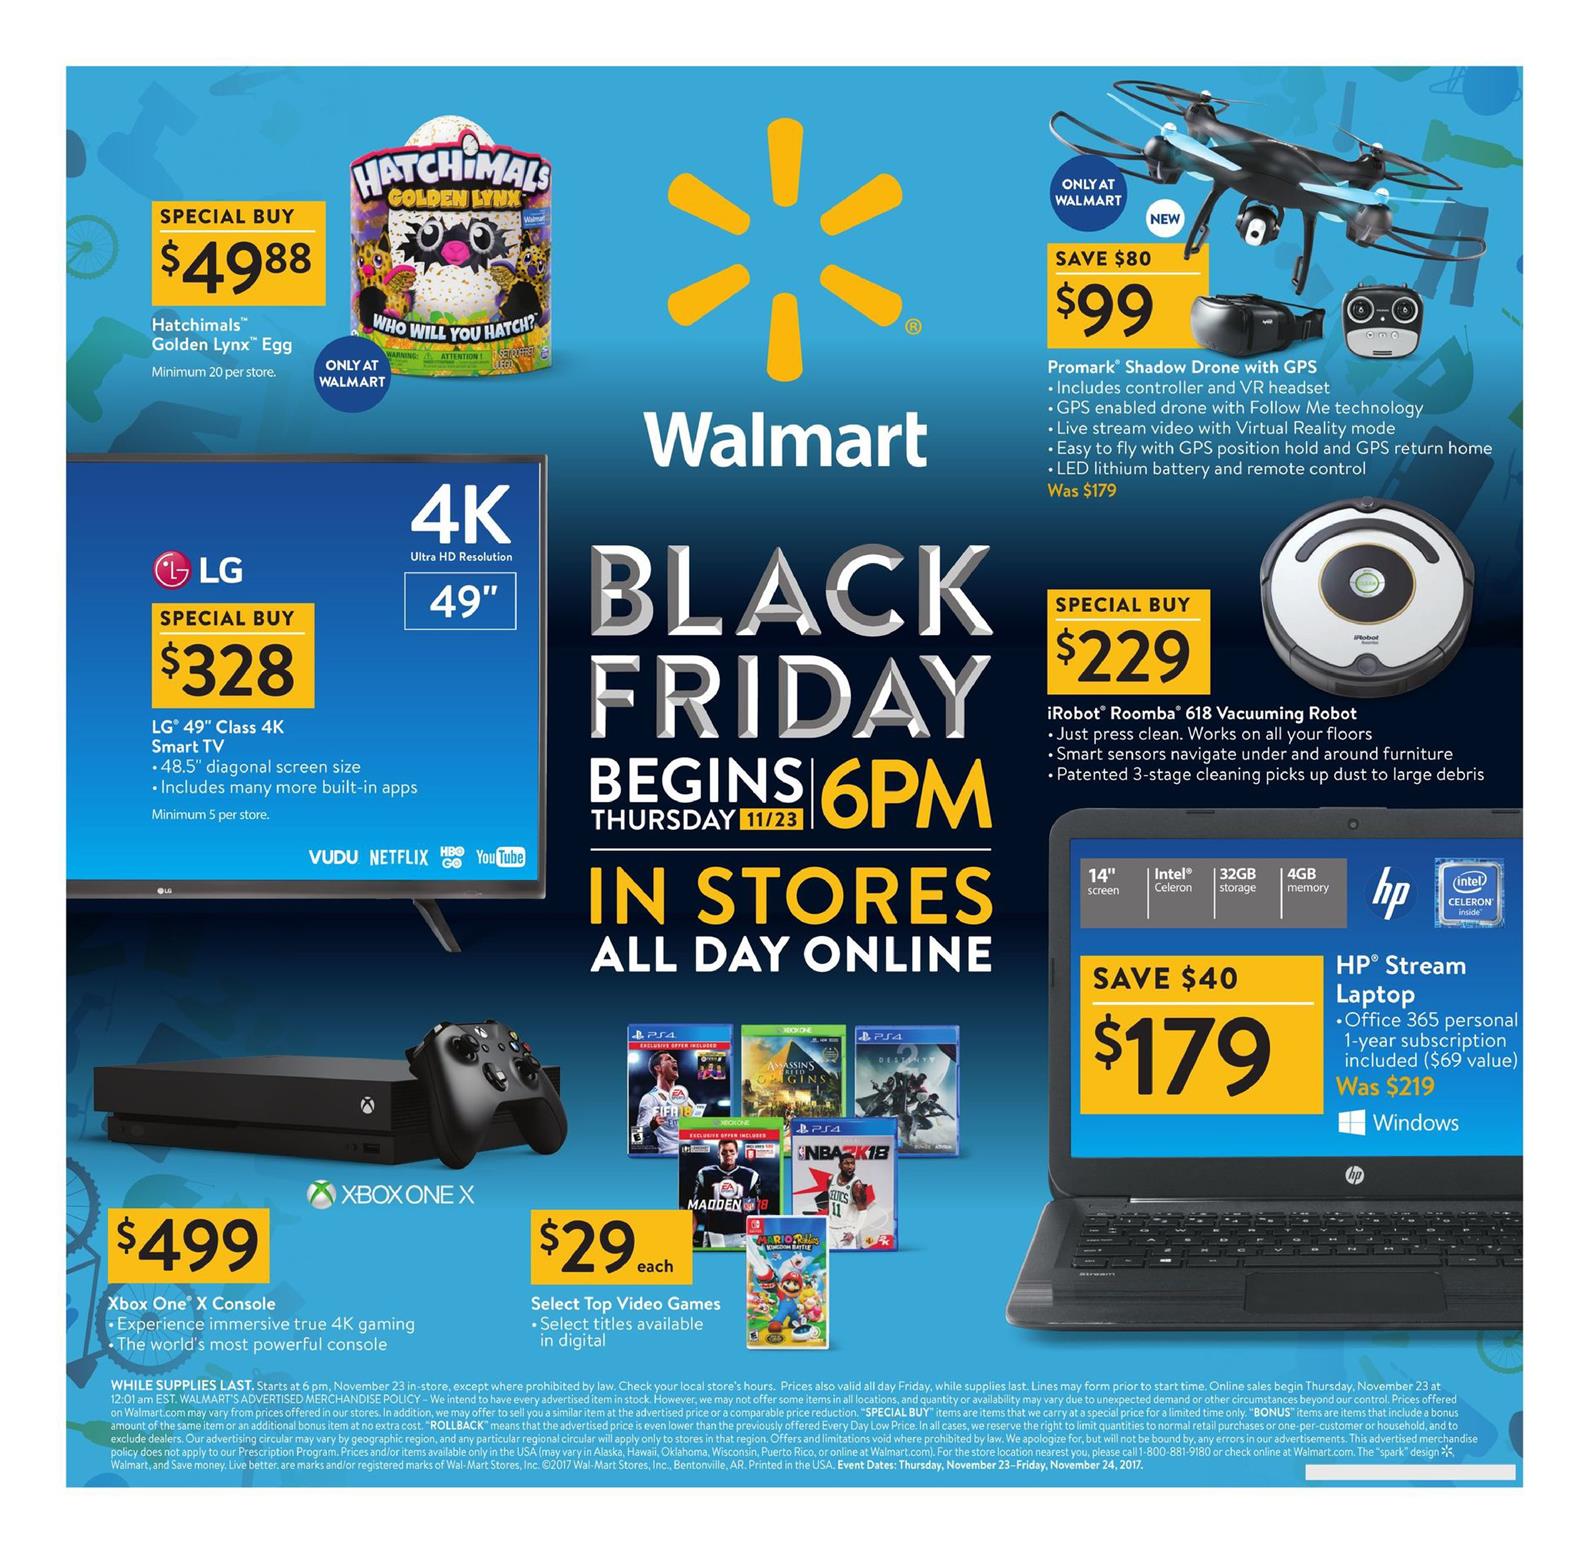 Walmart Black Friday Ad 2017 - WeeklyAds2 - Will Black Friday Deals Be For Universe